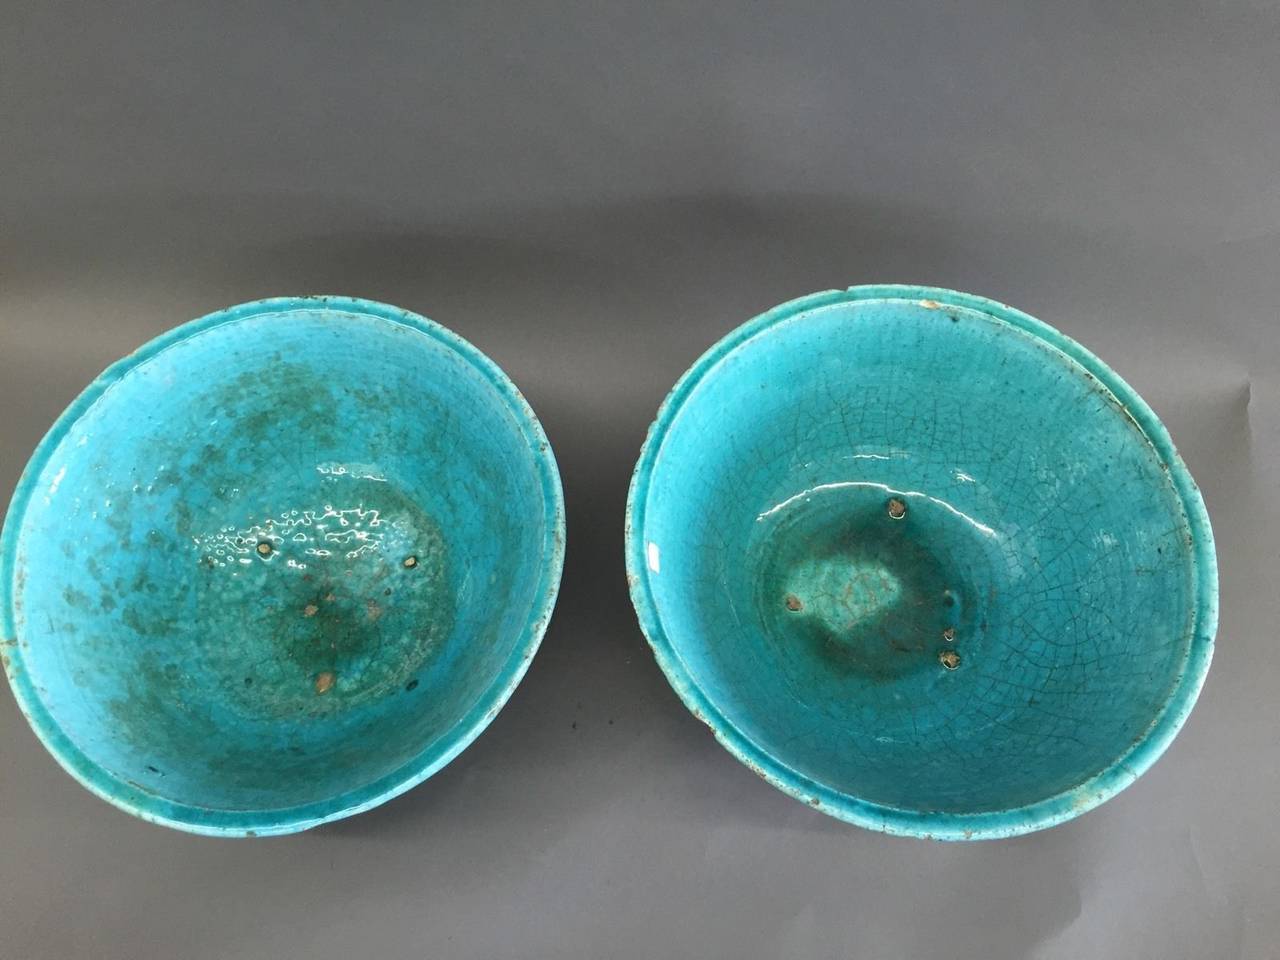 A Pair of Persian Ceramic Turquoise Handcrafted Bowls

They are a about 1/2